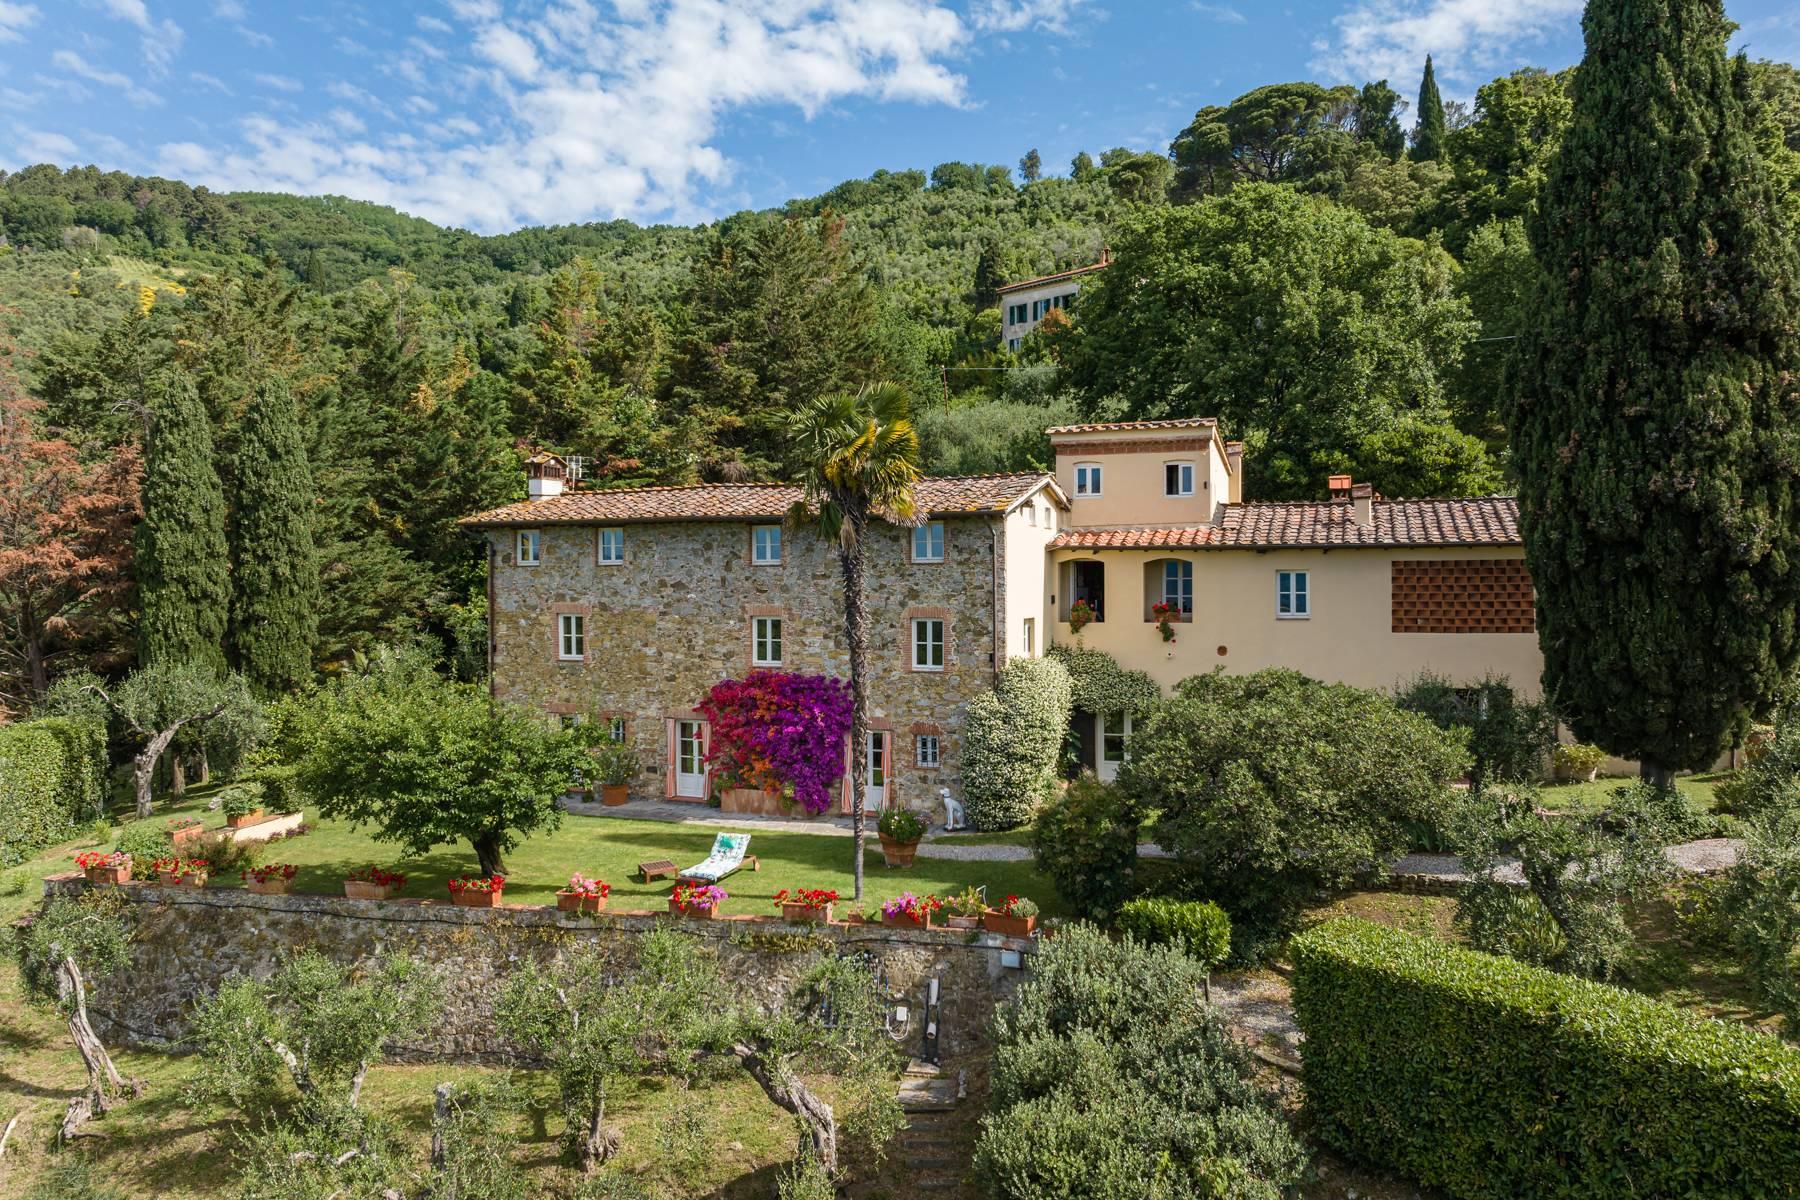 Elegant farmhouse with panoramic view over the hills of Lucca - 1